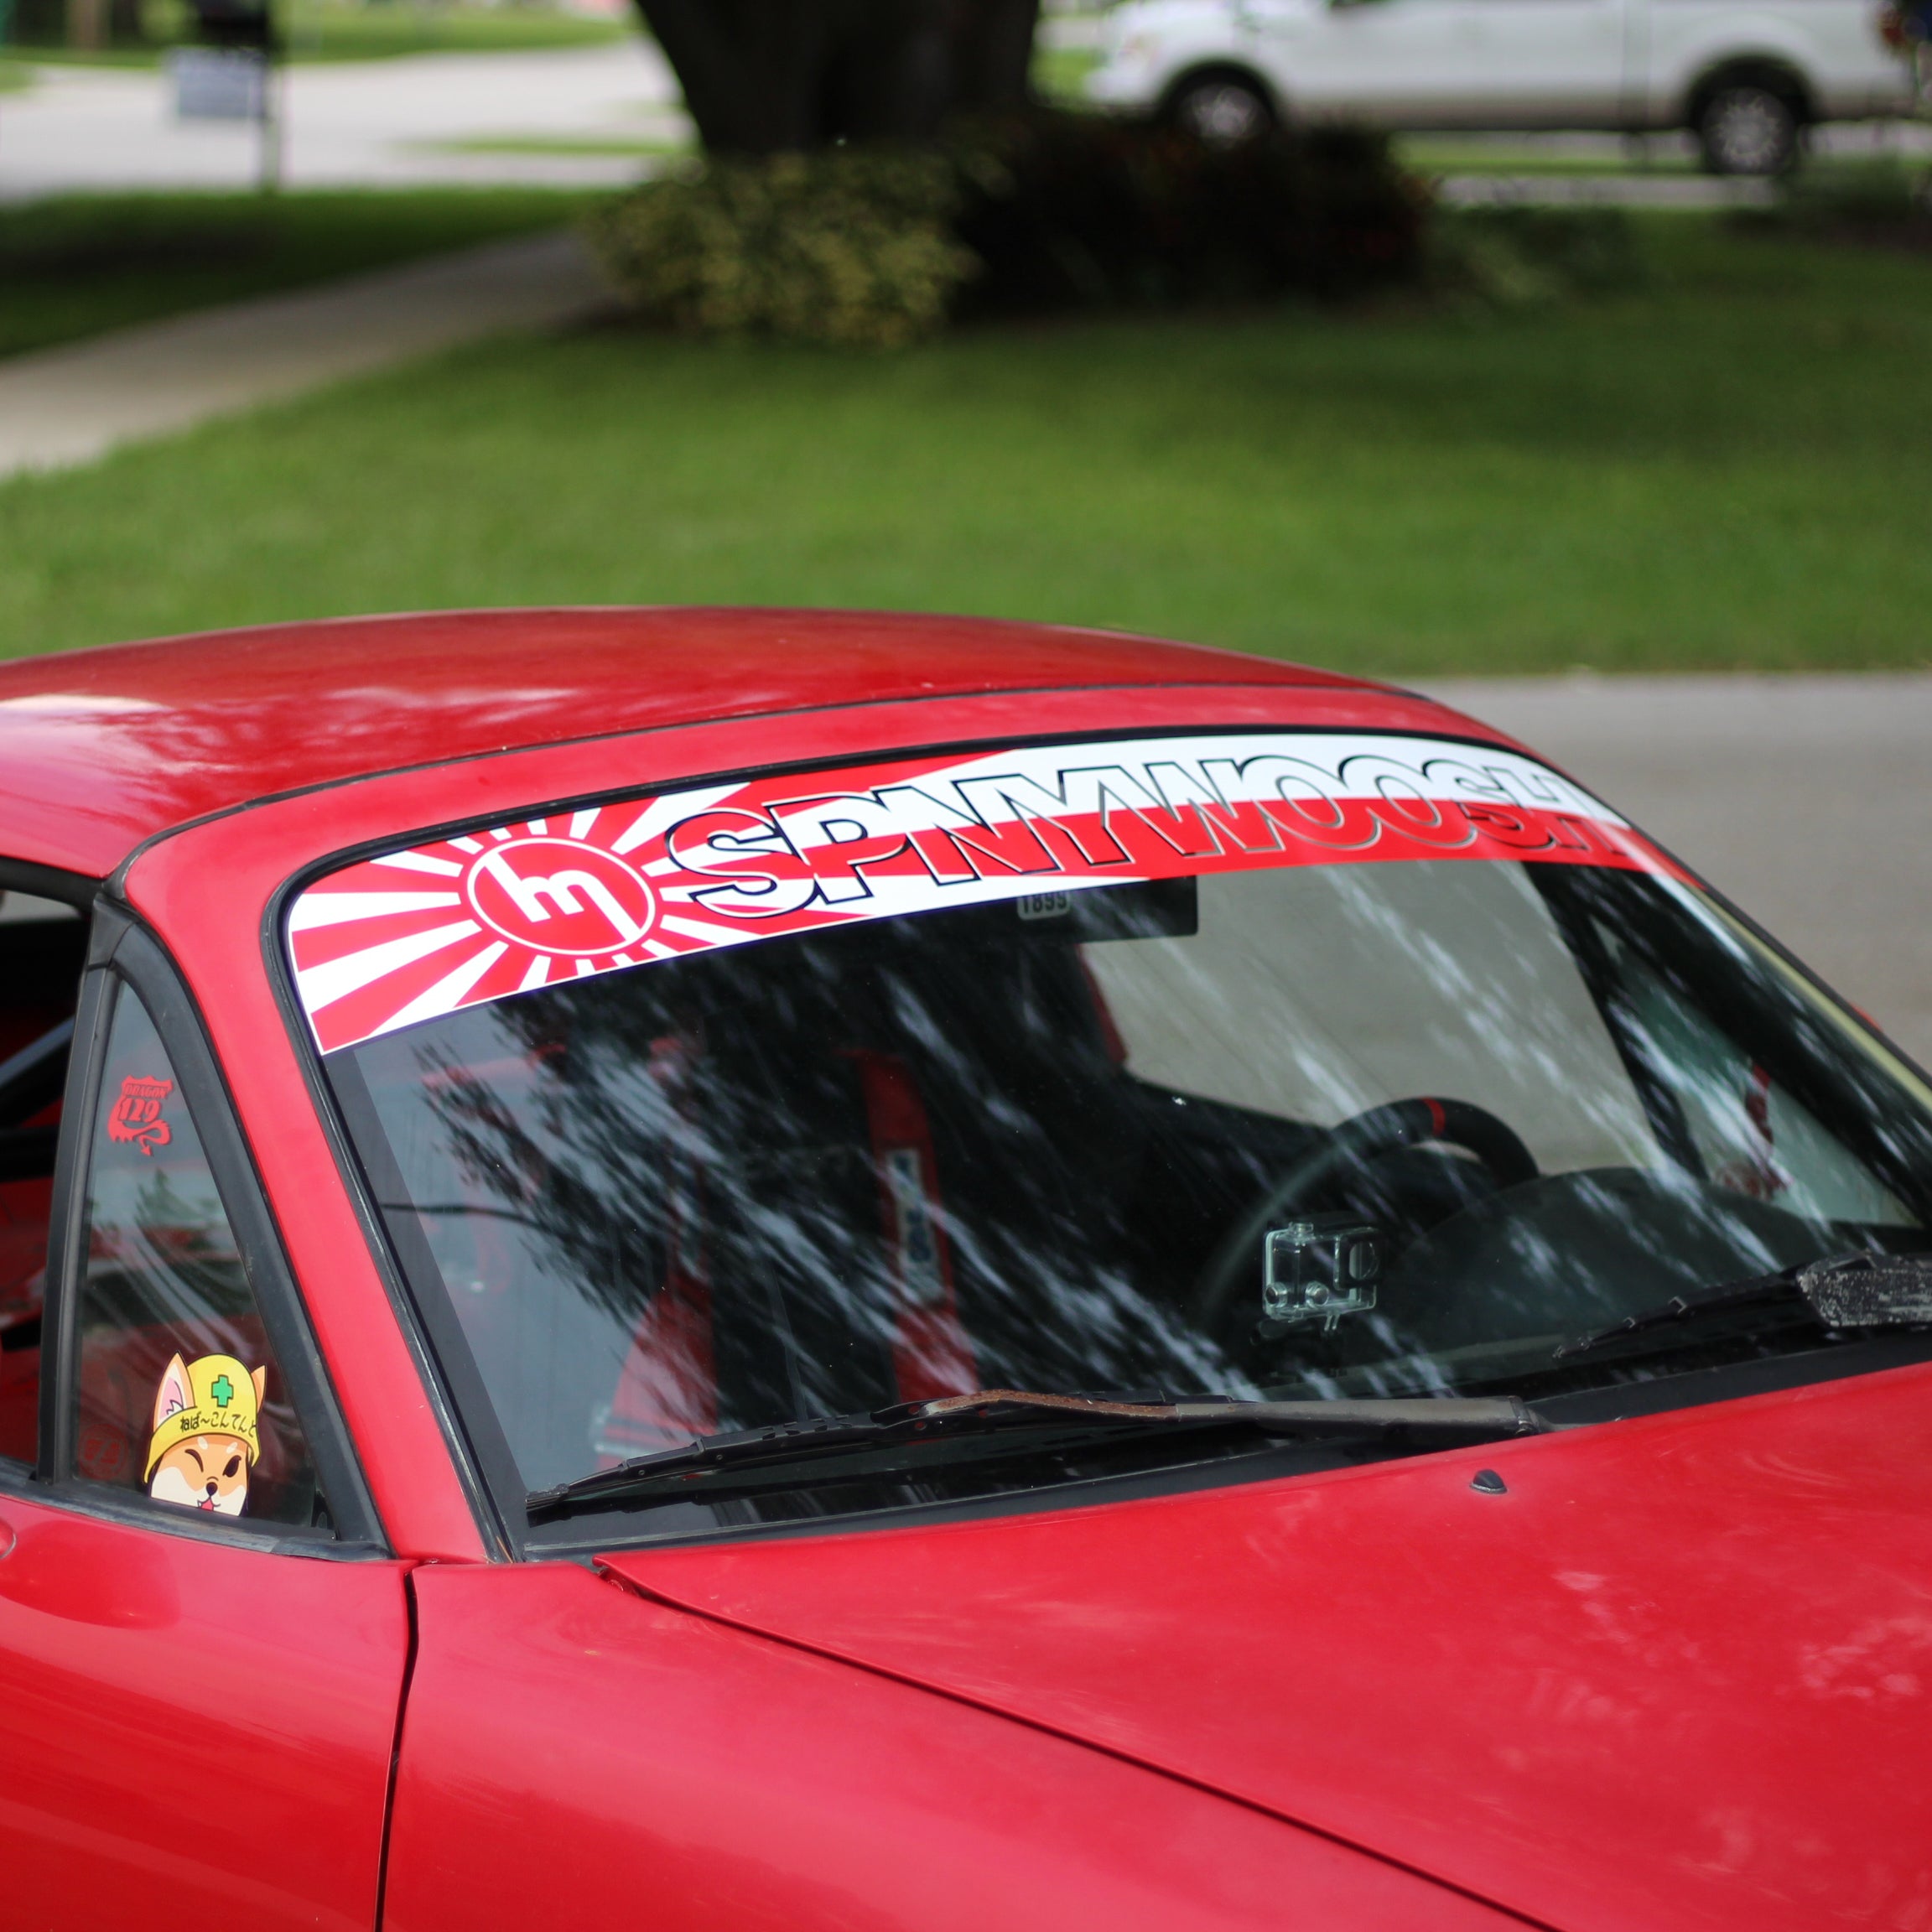 Windshield Banner - All Window Banners